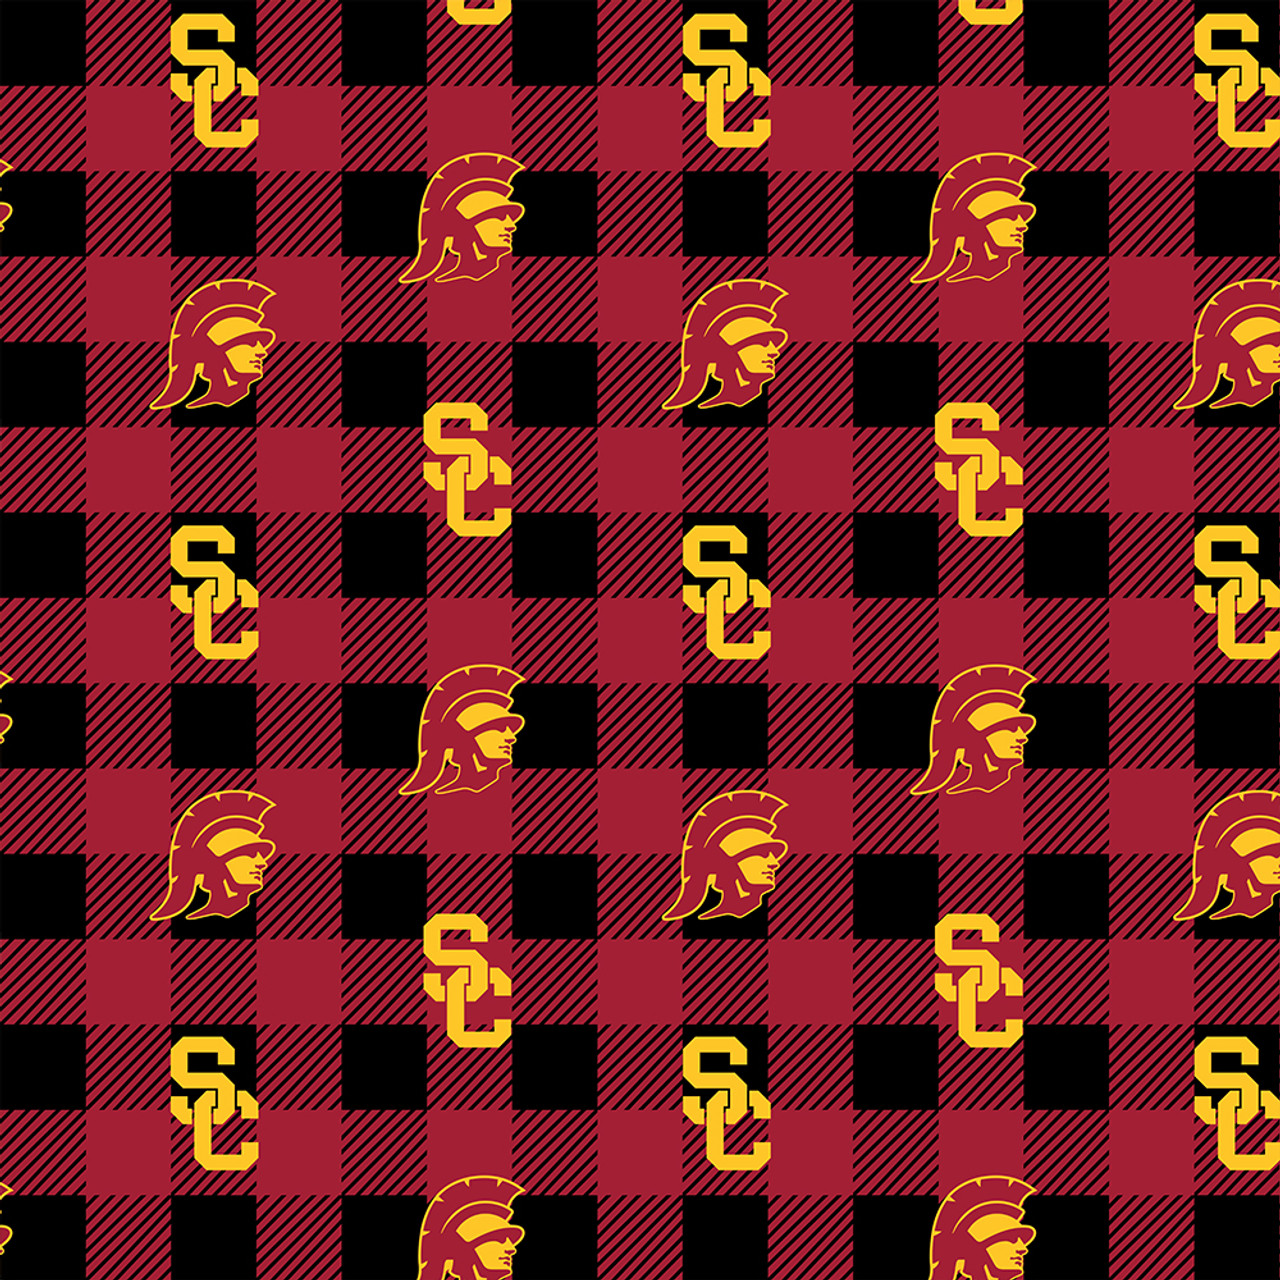 USC Fleece Fabric with Buffalo Plaid design-Sold by the Yard